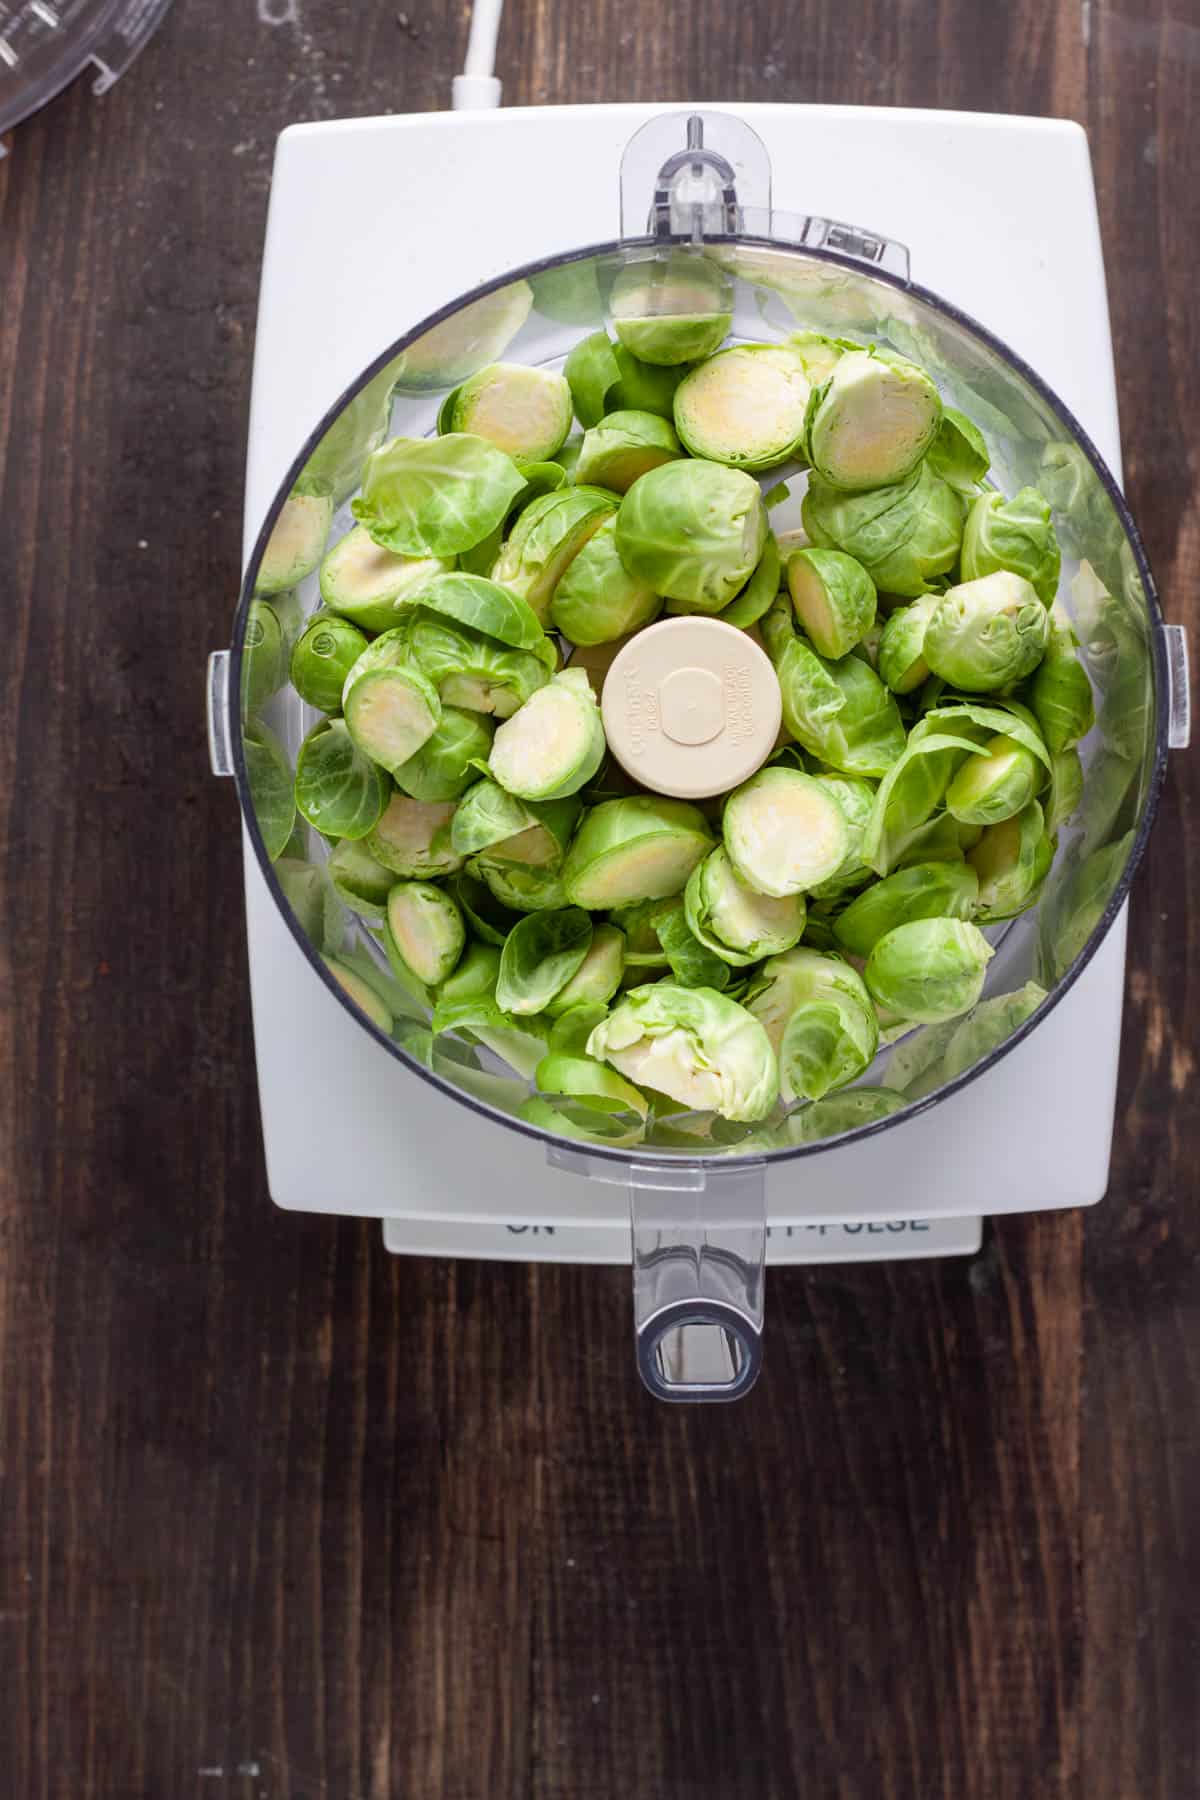 Halved brussels sprouts in the base of a food processor.